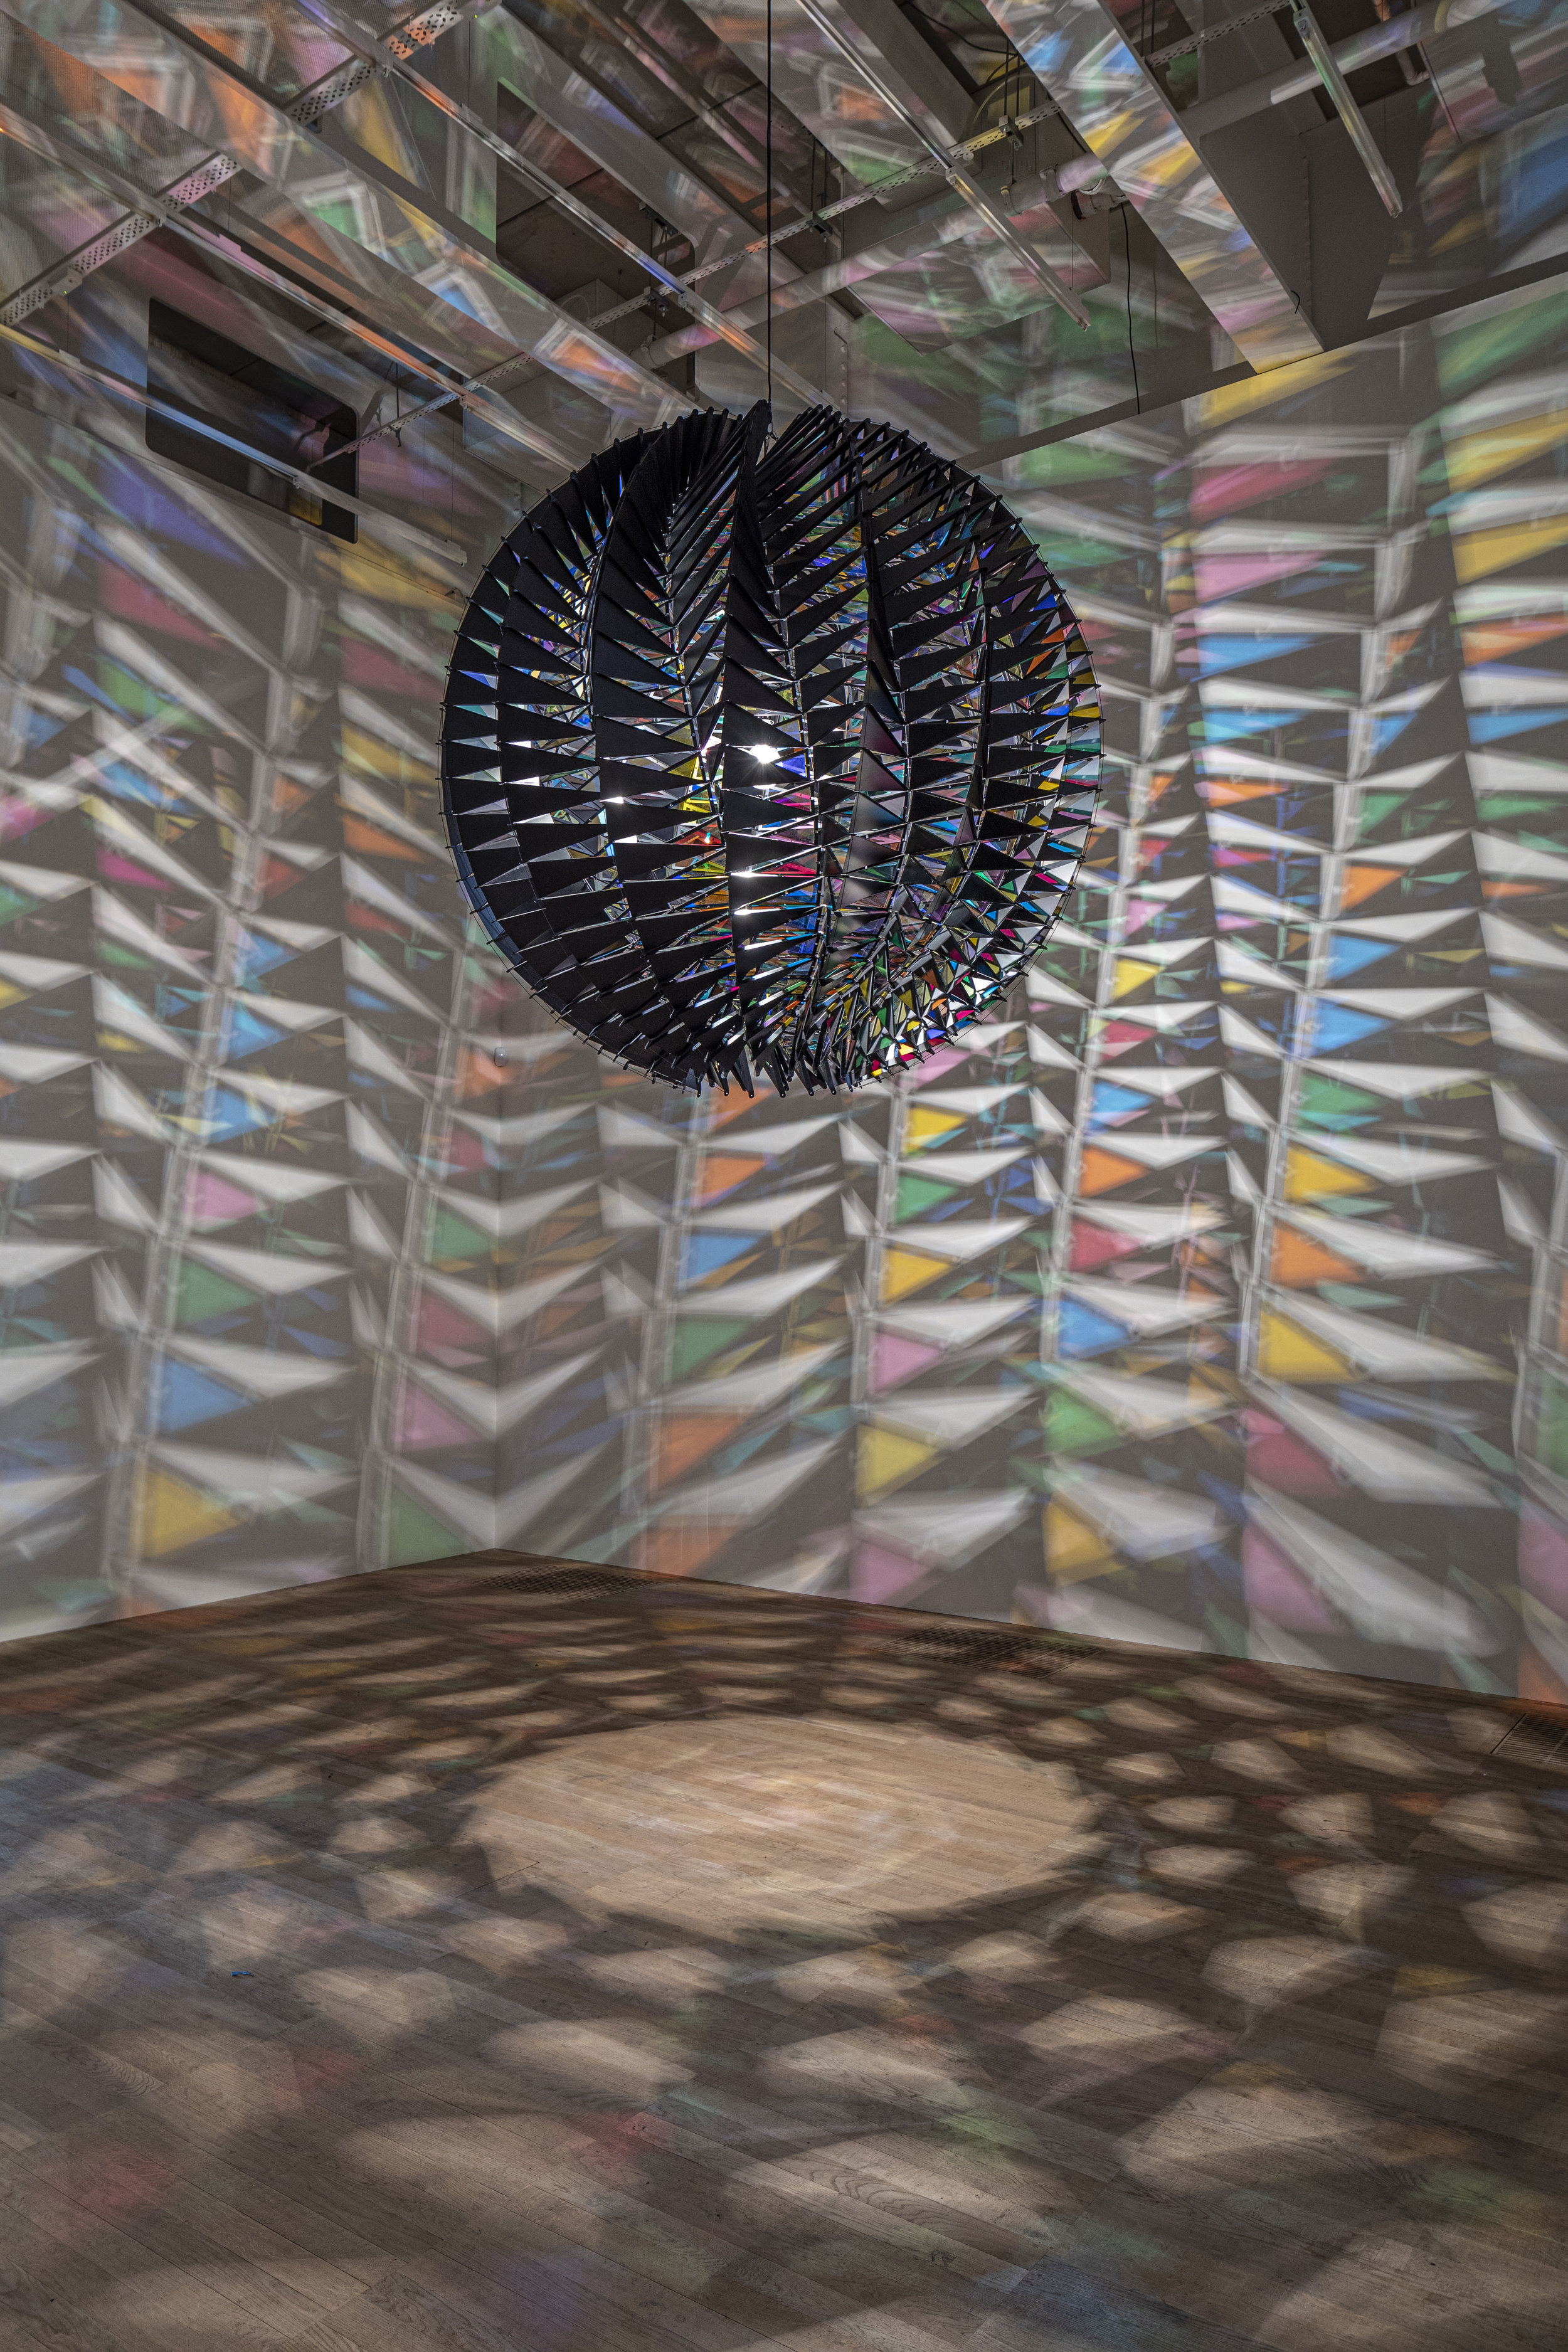  Olafur Eliasson  In real life , 2019 Aluminium, colour-effect filter glass (green, yellow, orange, red, pink, cyan), LED light Diameter 208 cm Installation view: Tate Modern, London, 2019 Photo: Anders Sune Berg  Courtesy of the artist; neugerriemsc